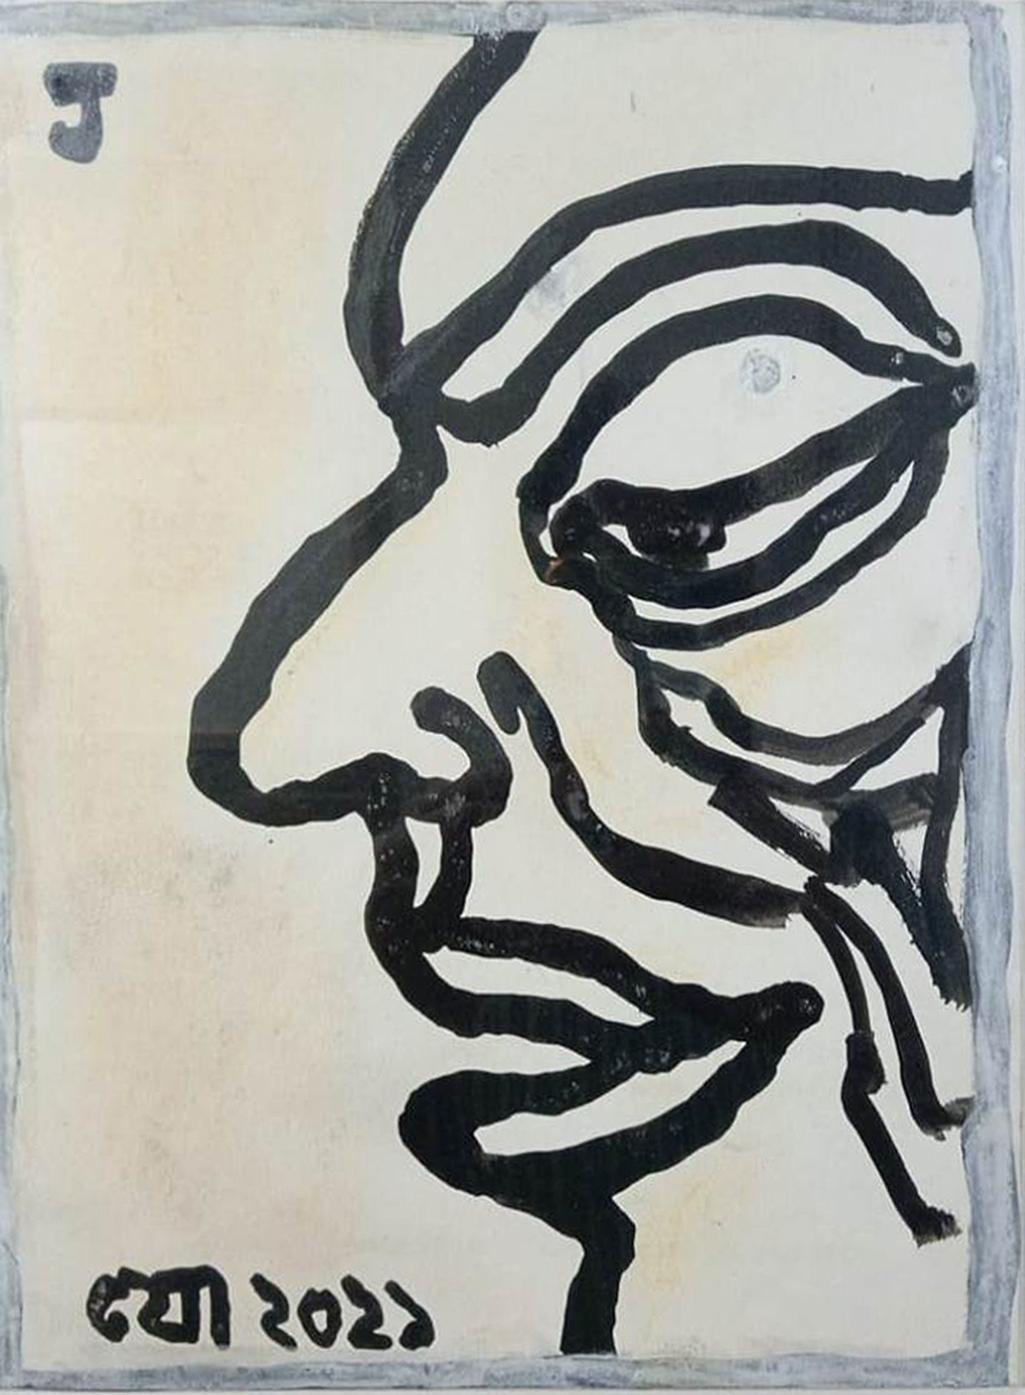 Jogen Chowdhury  Figurative Painting - Face, Black & White Ink & Pastel on Paper by Modern Indian Artist "In Stock"